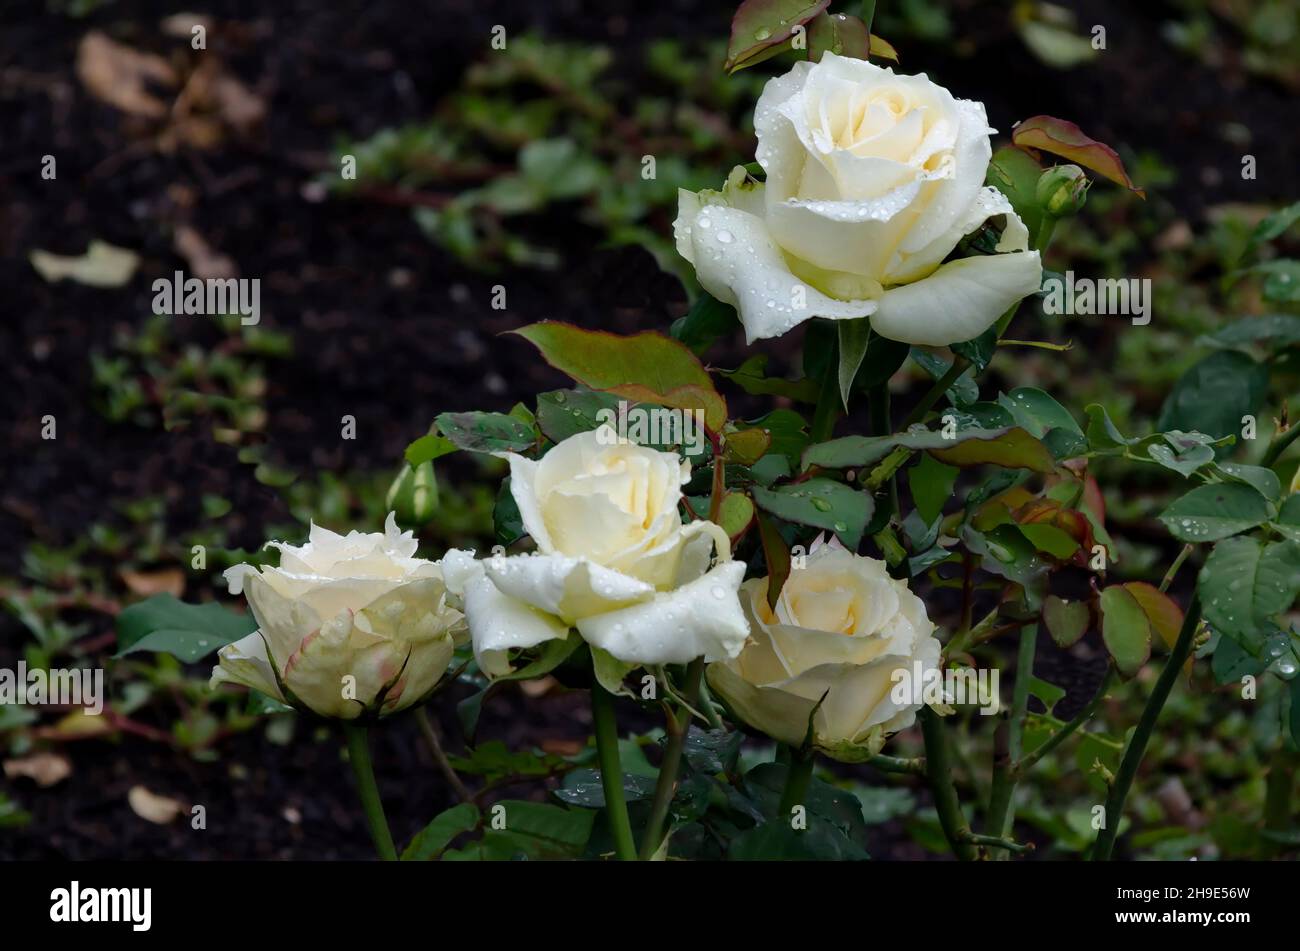 Flowering rose bush in the garden with white flowers covered with ...